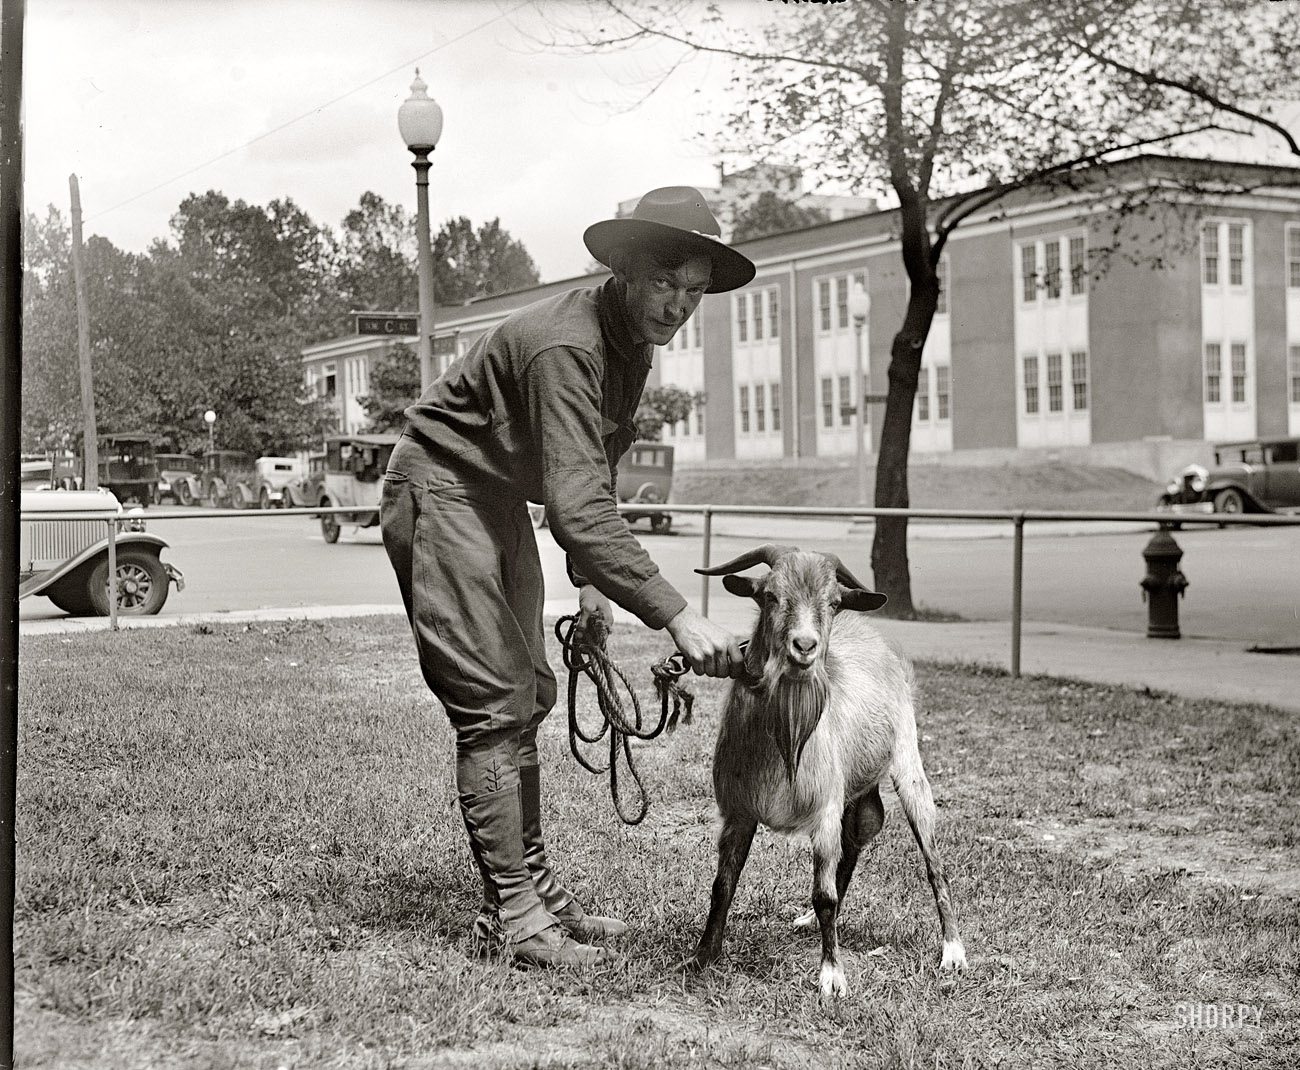 September 5, 1929. "Wm. Hamilton Bones, Stimson Goat." Another shot of the tobacco-chewing goat owned by Secretary of State Henry Stimson. National Photo Company Collection glass negative. View full size.